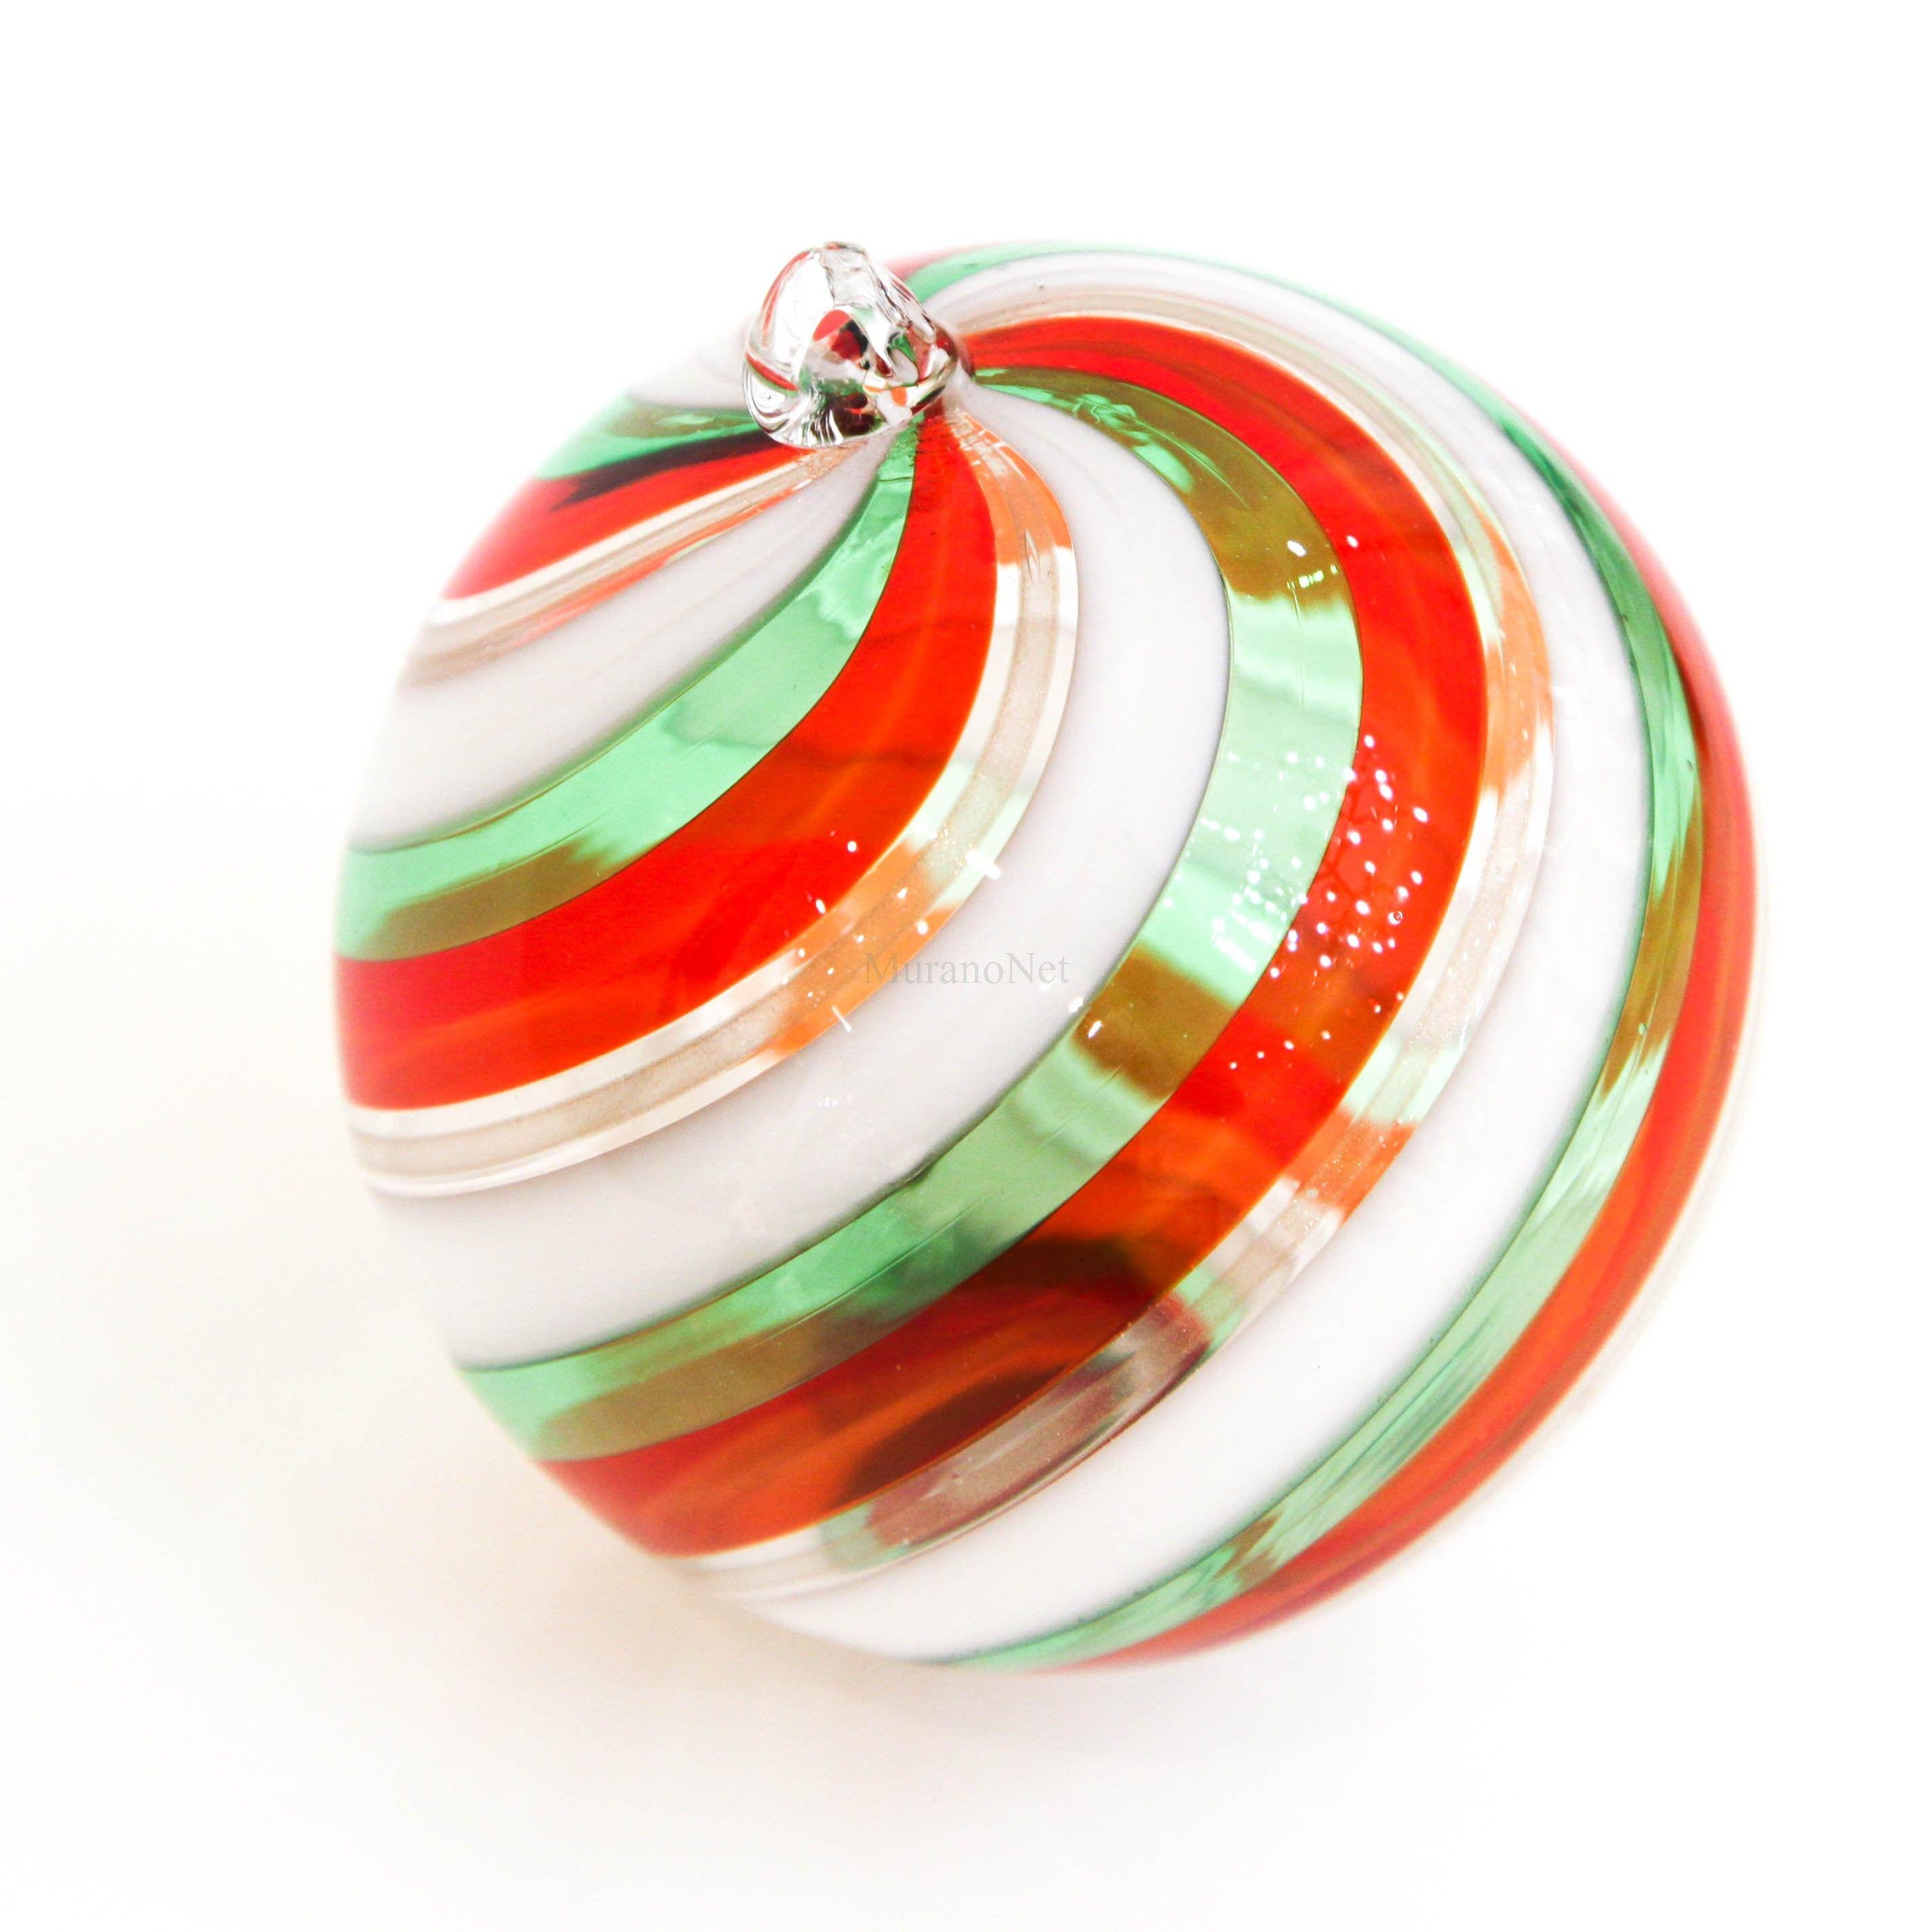 Red-Orange and Green Lines Logo - Christmas bauble - Red and Green Lines in Murano Glass | MuranoNet ...